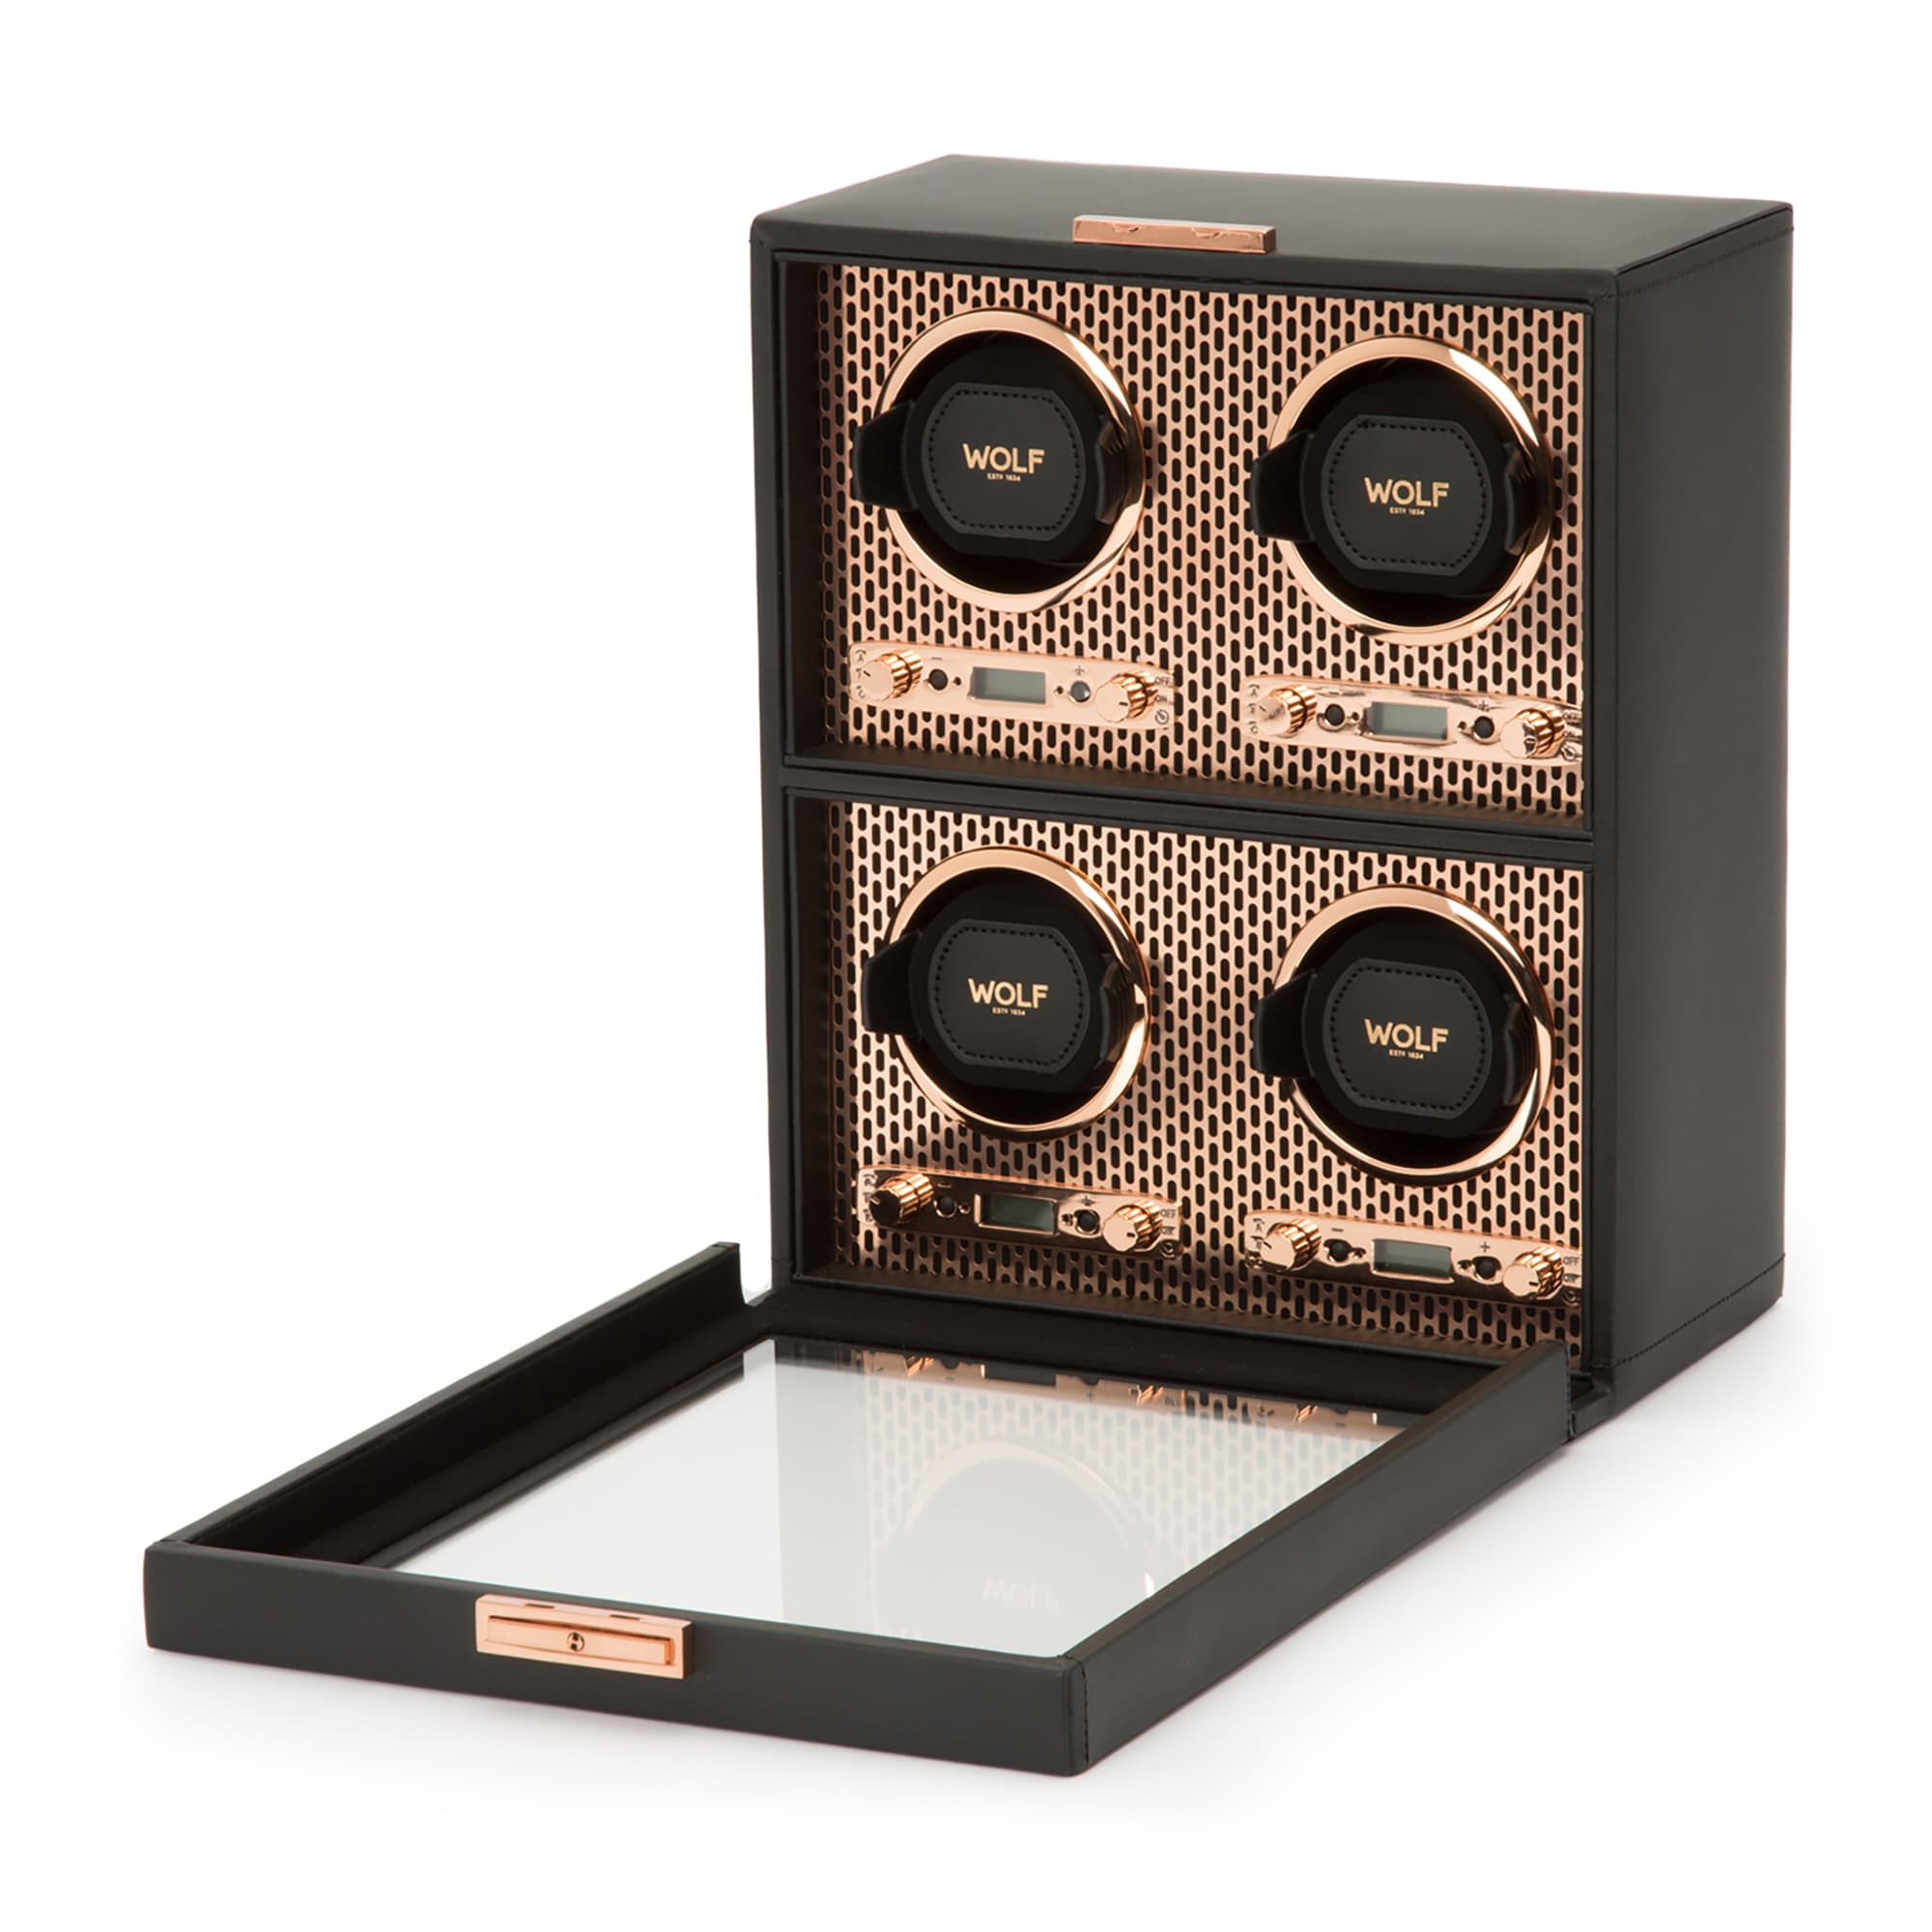 Wolf-Axis-4PC-Watch-Winder-Copper-469516-2